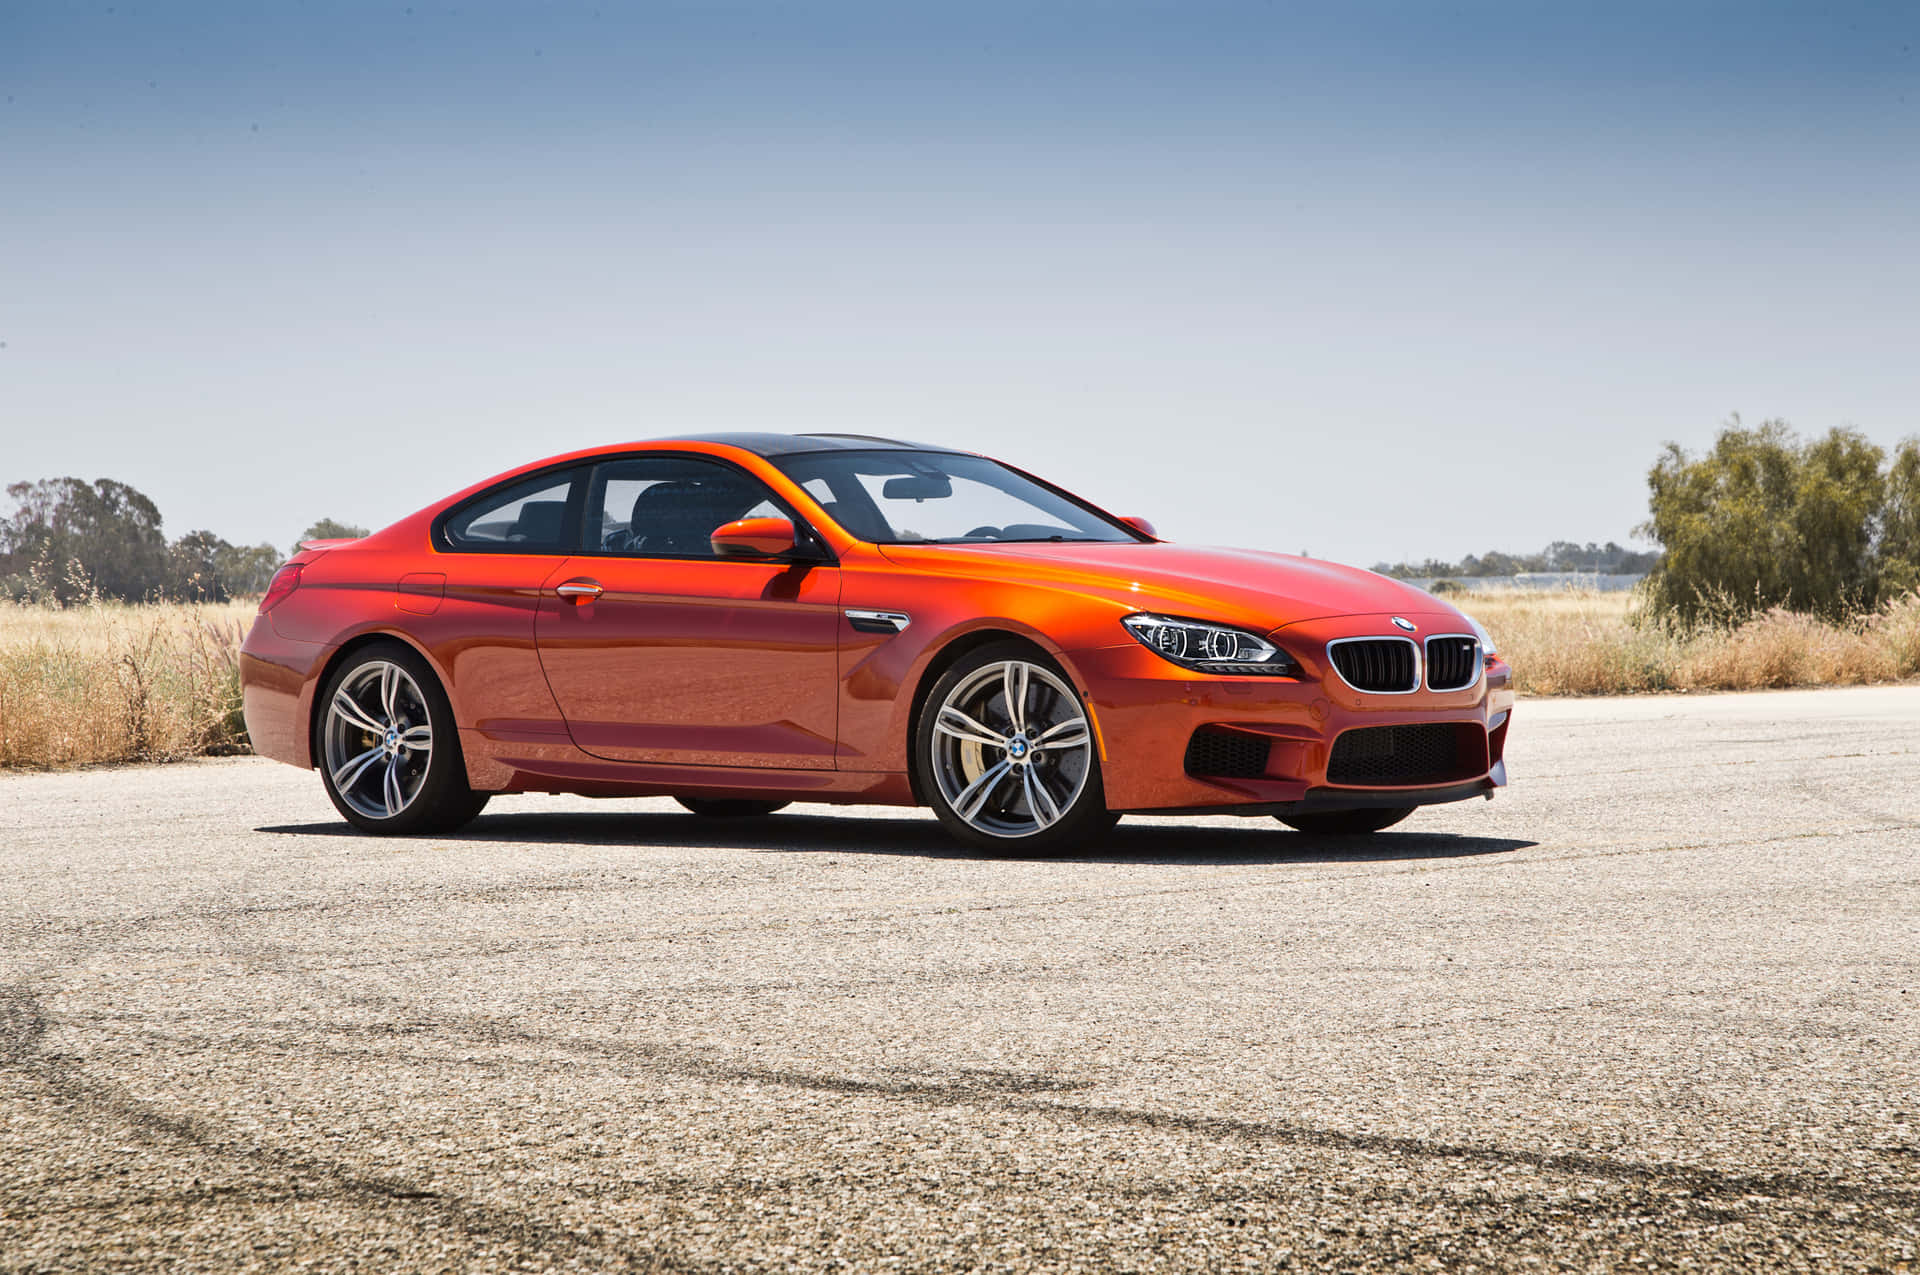 Striking BMW M6 Coupe in Action Wallpaper